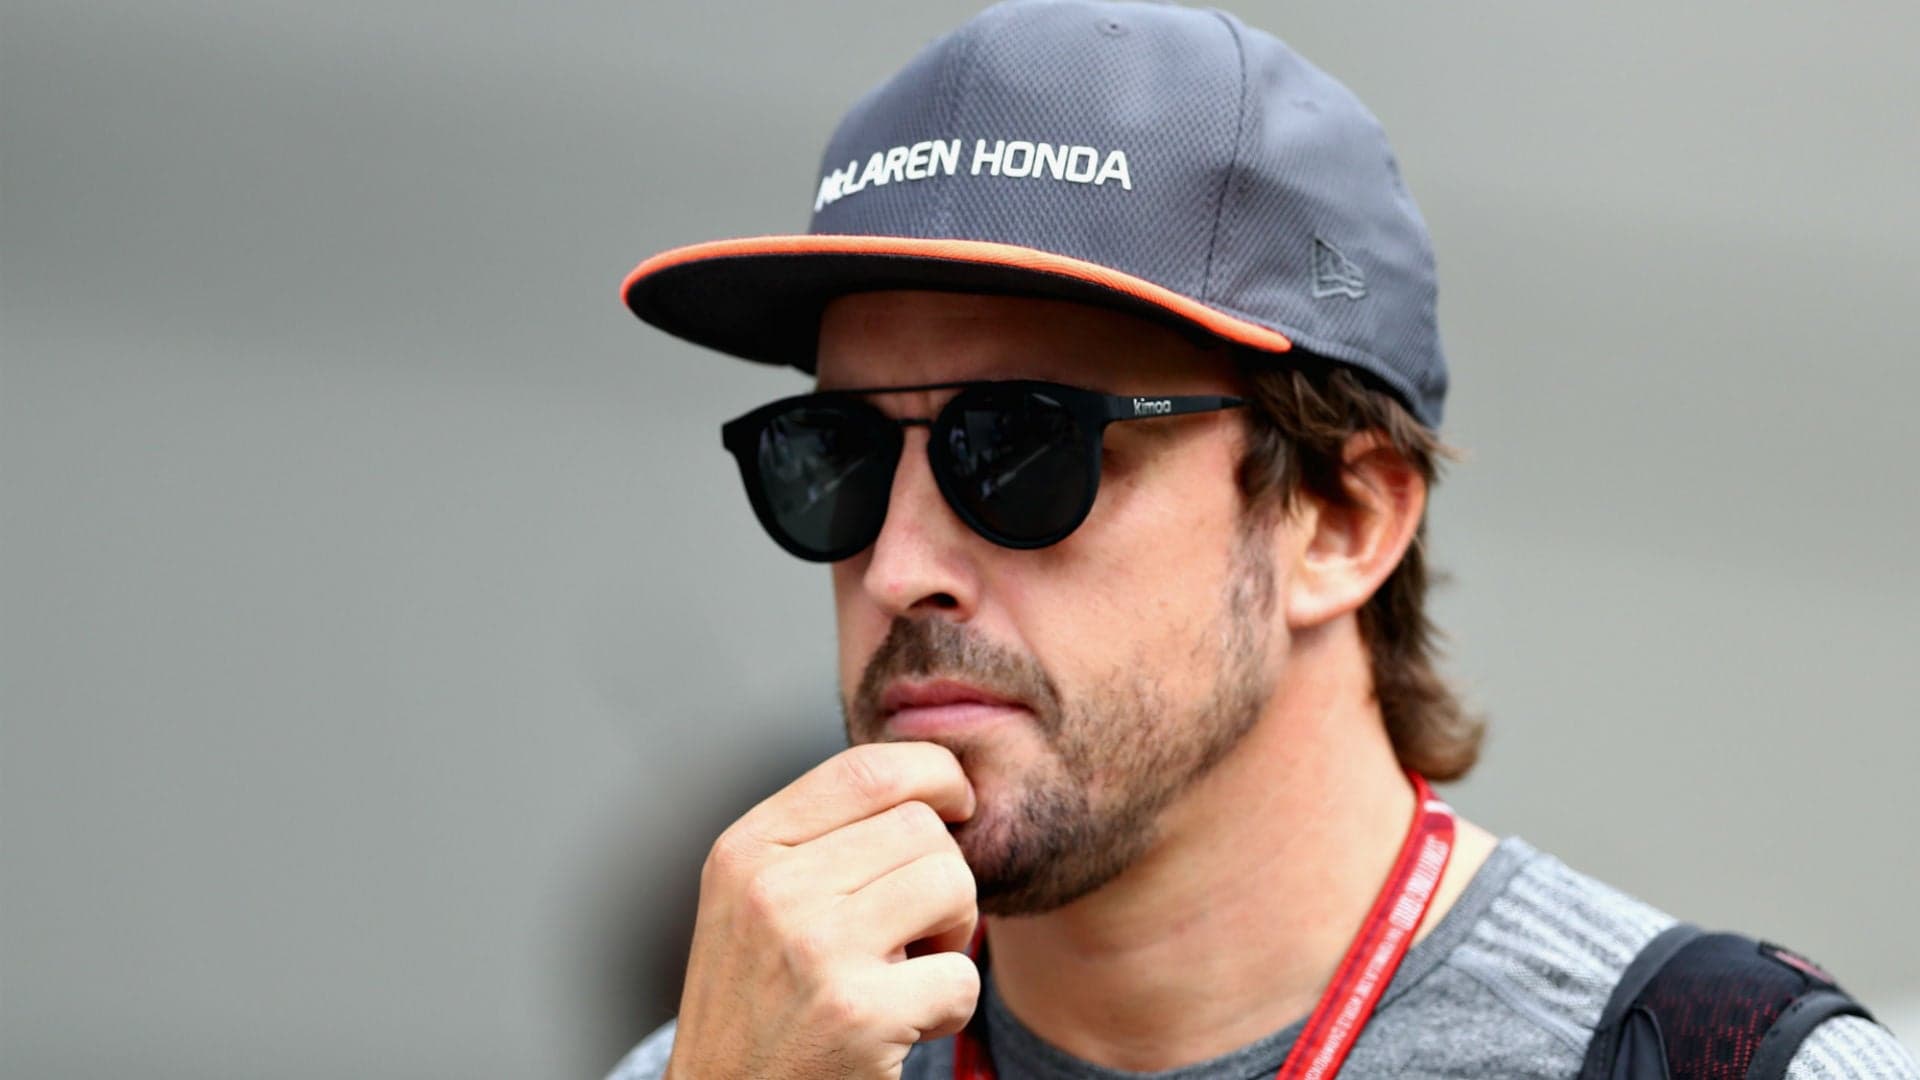 Fernando Alonso Punched a Hole in the Wall After Singapore GP Crash